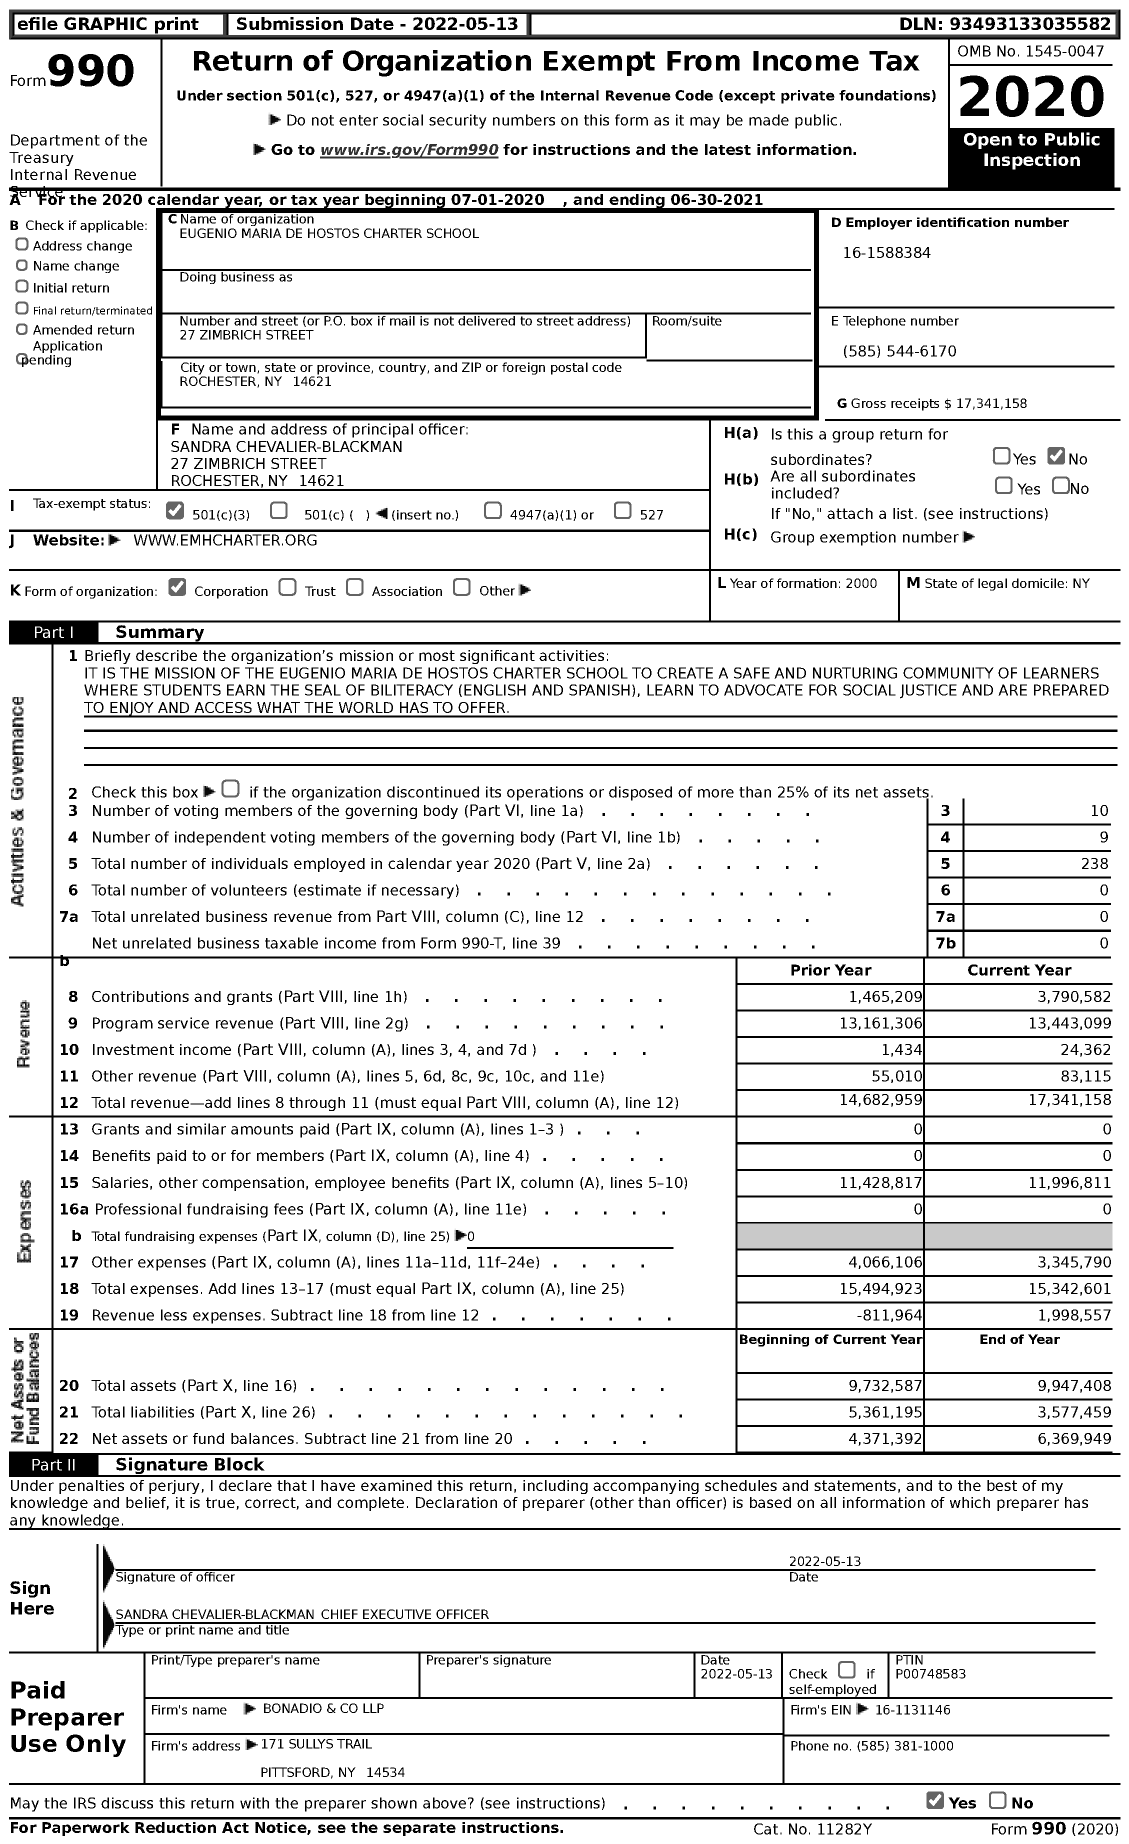 Image of first page of 2020 Form 990 for Eugenio Maria de Hostos Charter School (EMHCS)